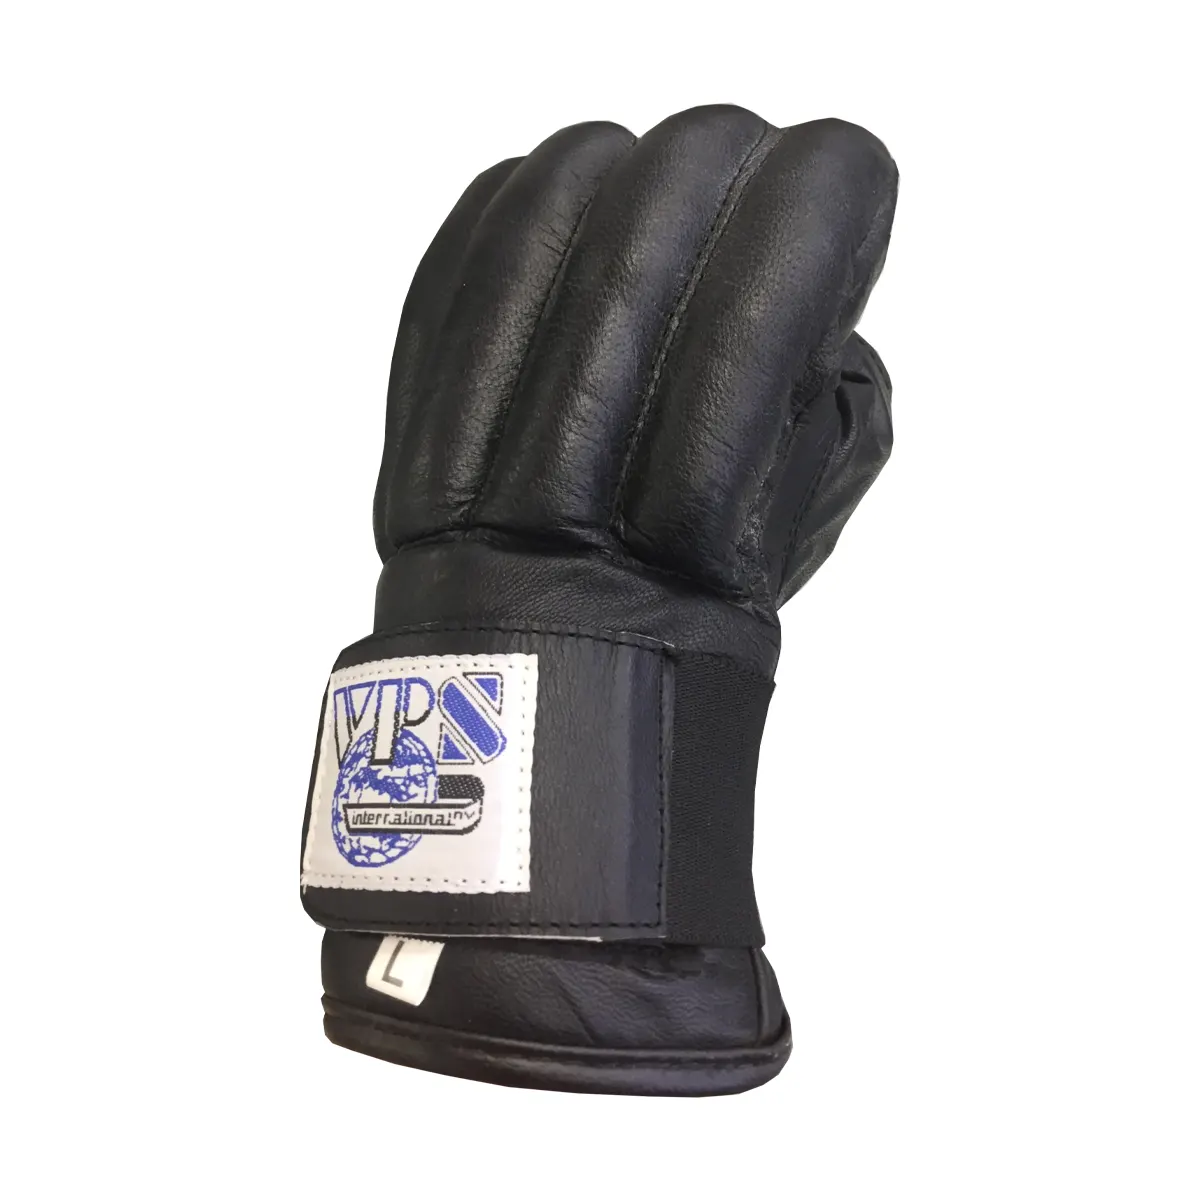 Leather boxing gloves freefight front view.